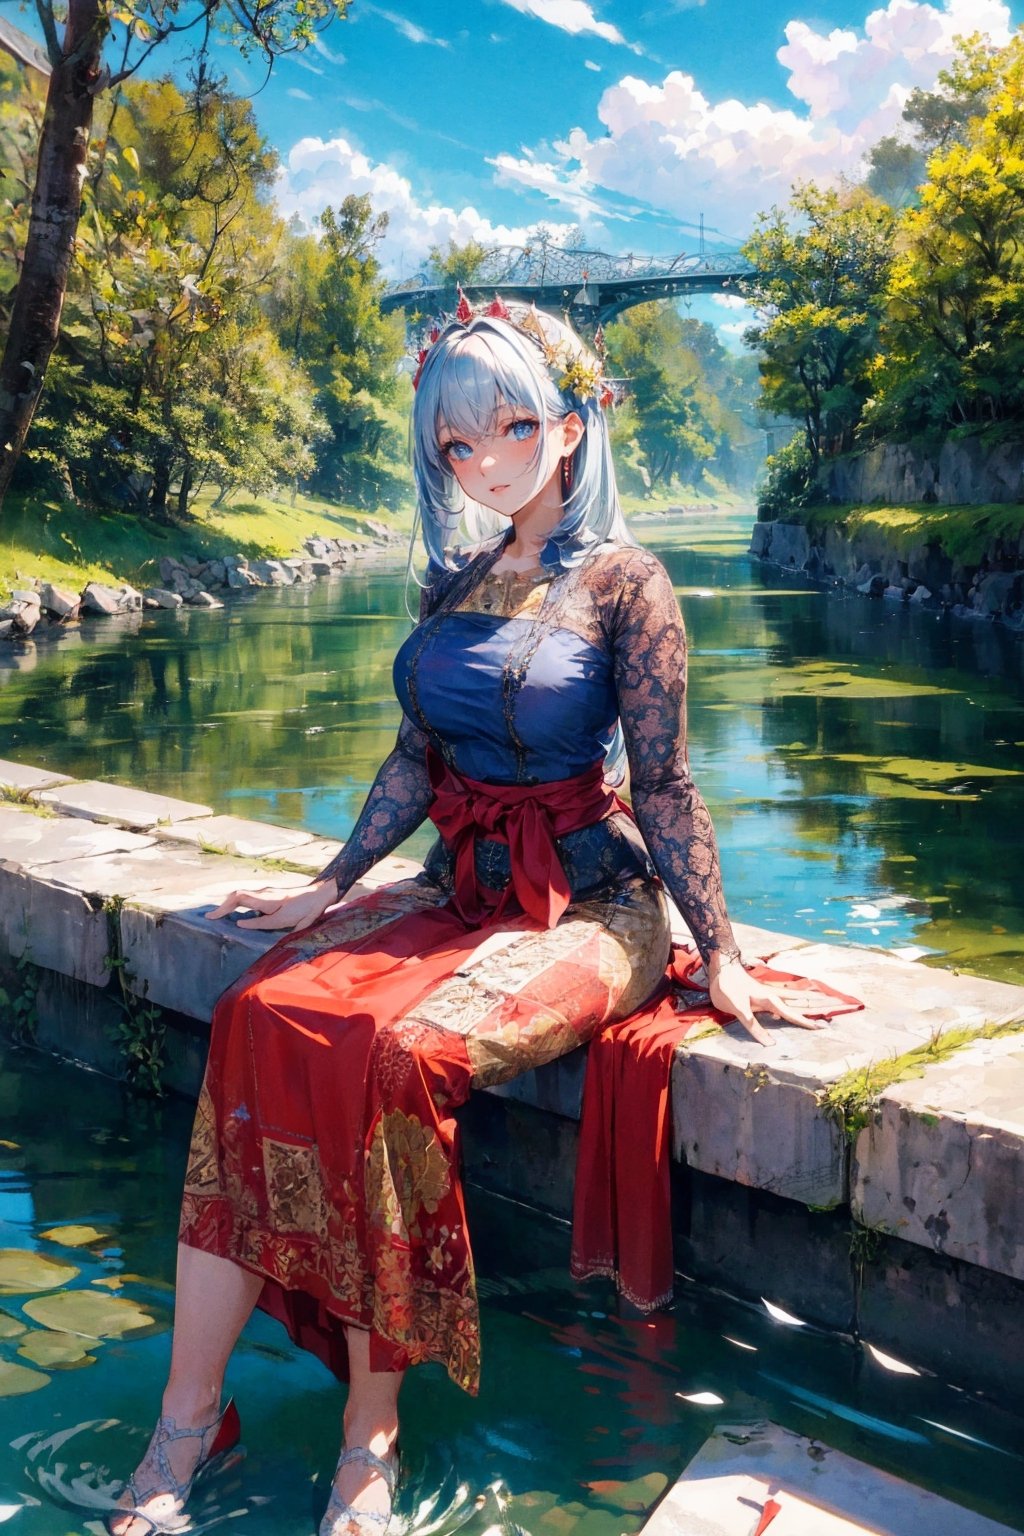 8K HDR image of a beautiful woman with long hair wearing traditional Indonesian kebaya, sitting beside a flowing river. Ensure the surroundings depict a picturesque,